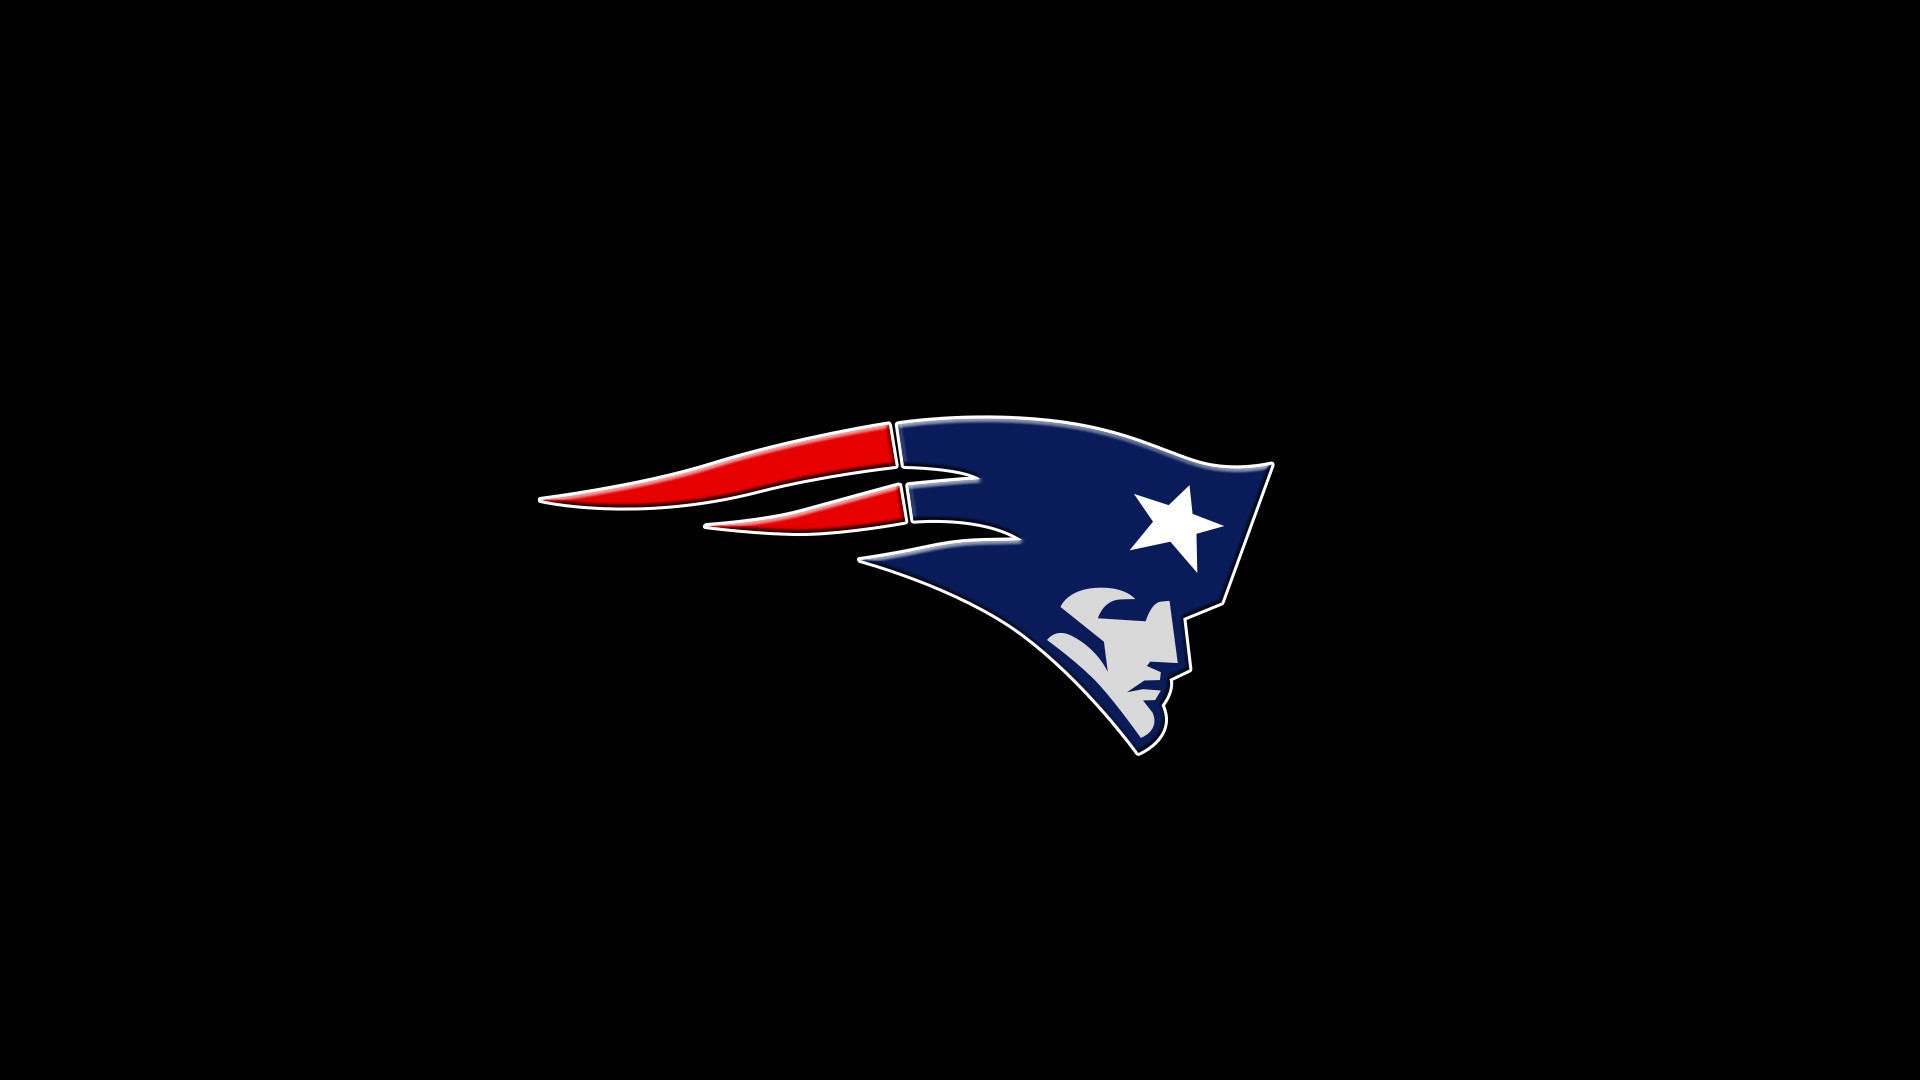 NE Patriots For Desktop Wallpaper with resolution 1920x1080 pixel. You can make this wallpaper for your Mac or Windows Desktop Background, iPhone, Android or Tablet and another Smartphone device